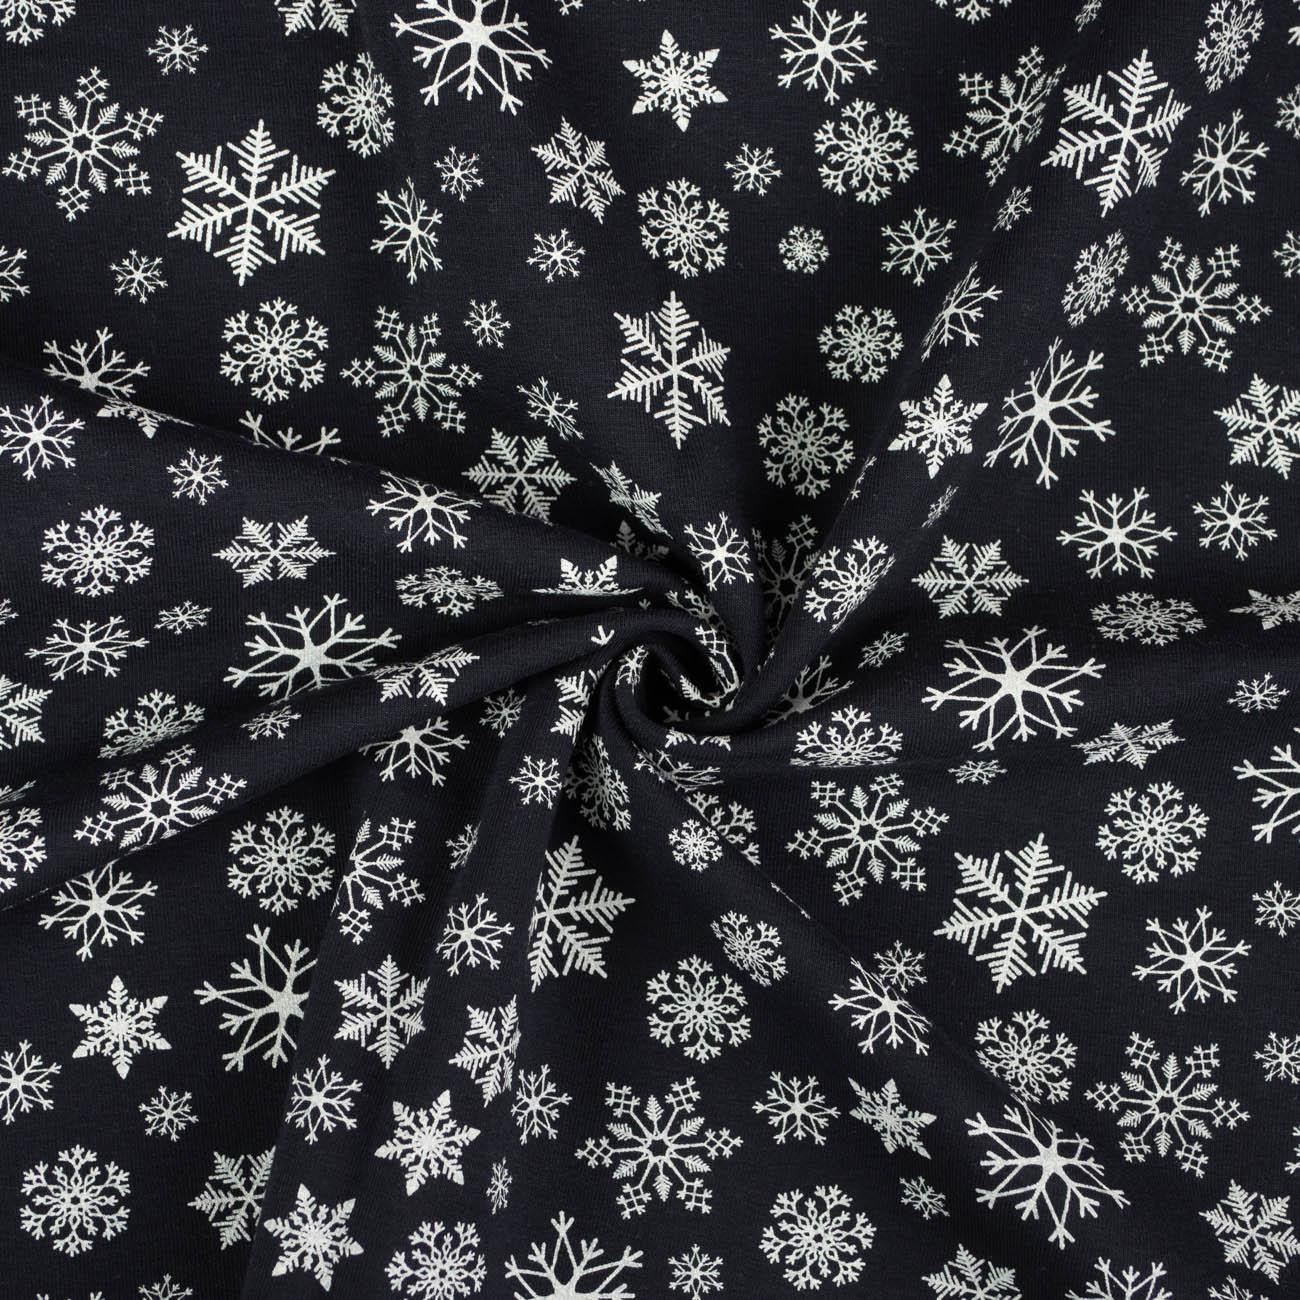 SNOWFLAKES / navy - French terry with elastane 